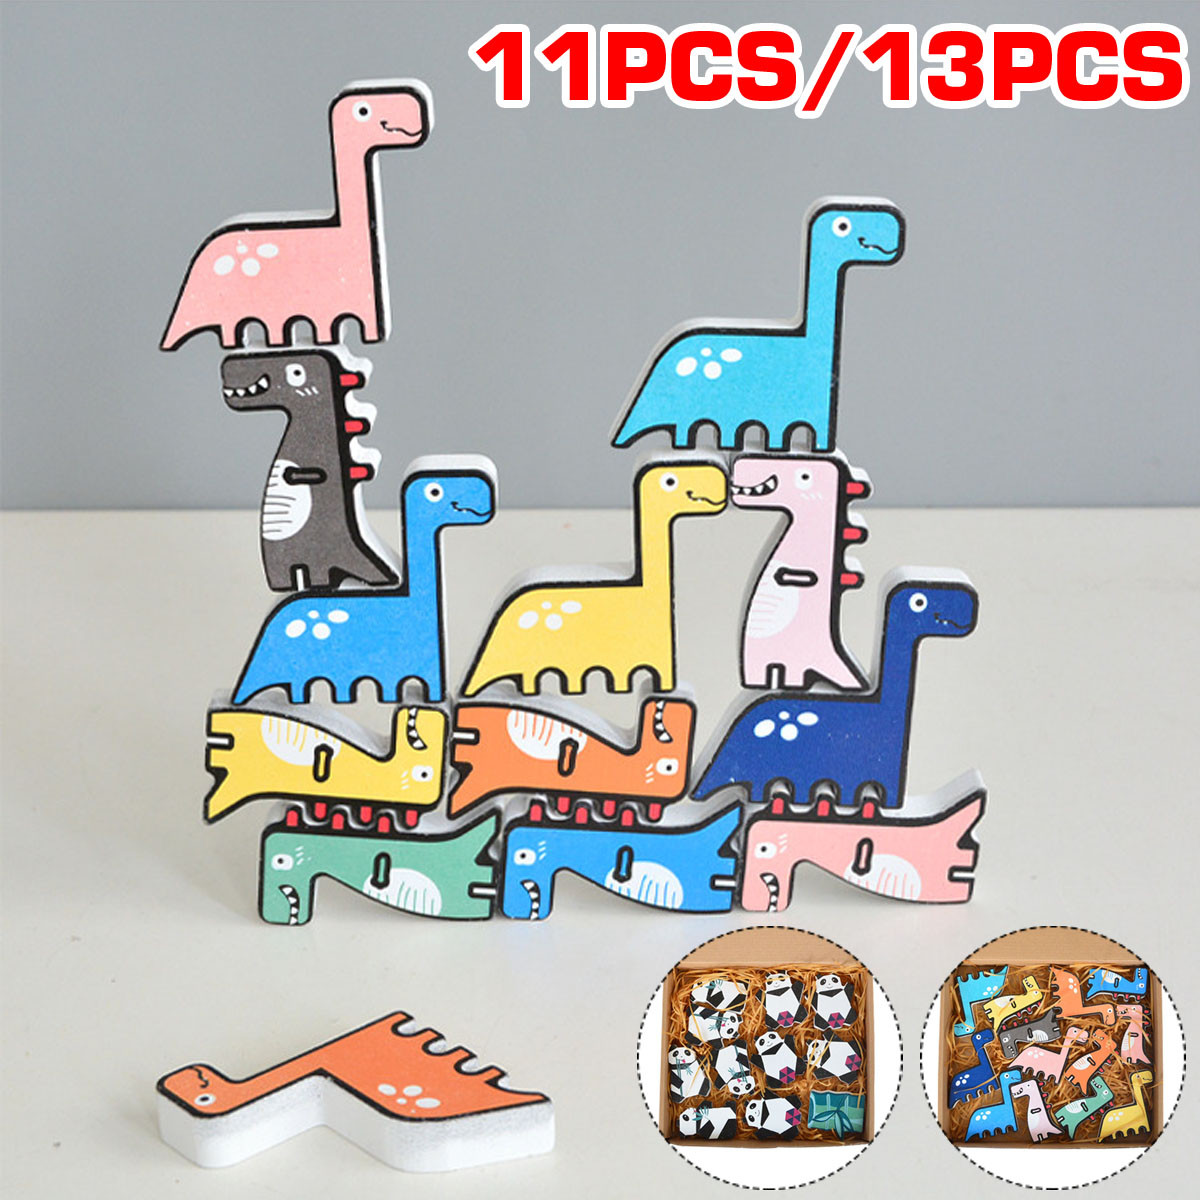 1113-Pcs-Creative-Panda-Dinosaur-Wooden-Stacking-Game-Building-Blocks-Early-Educational-Toy-for-Kids-1717485-2